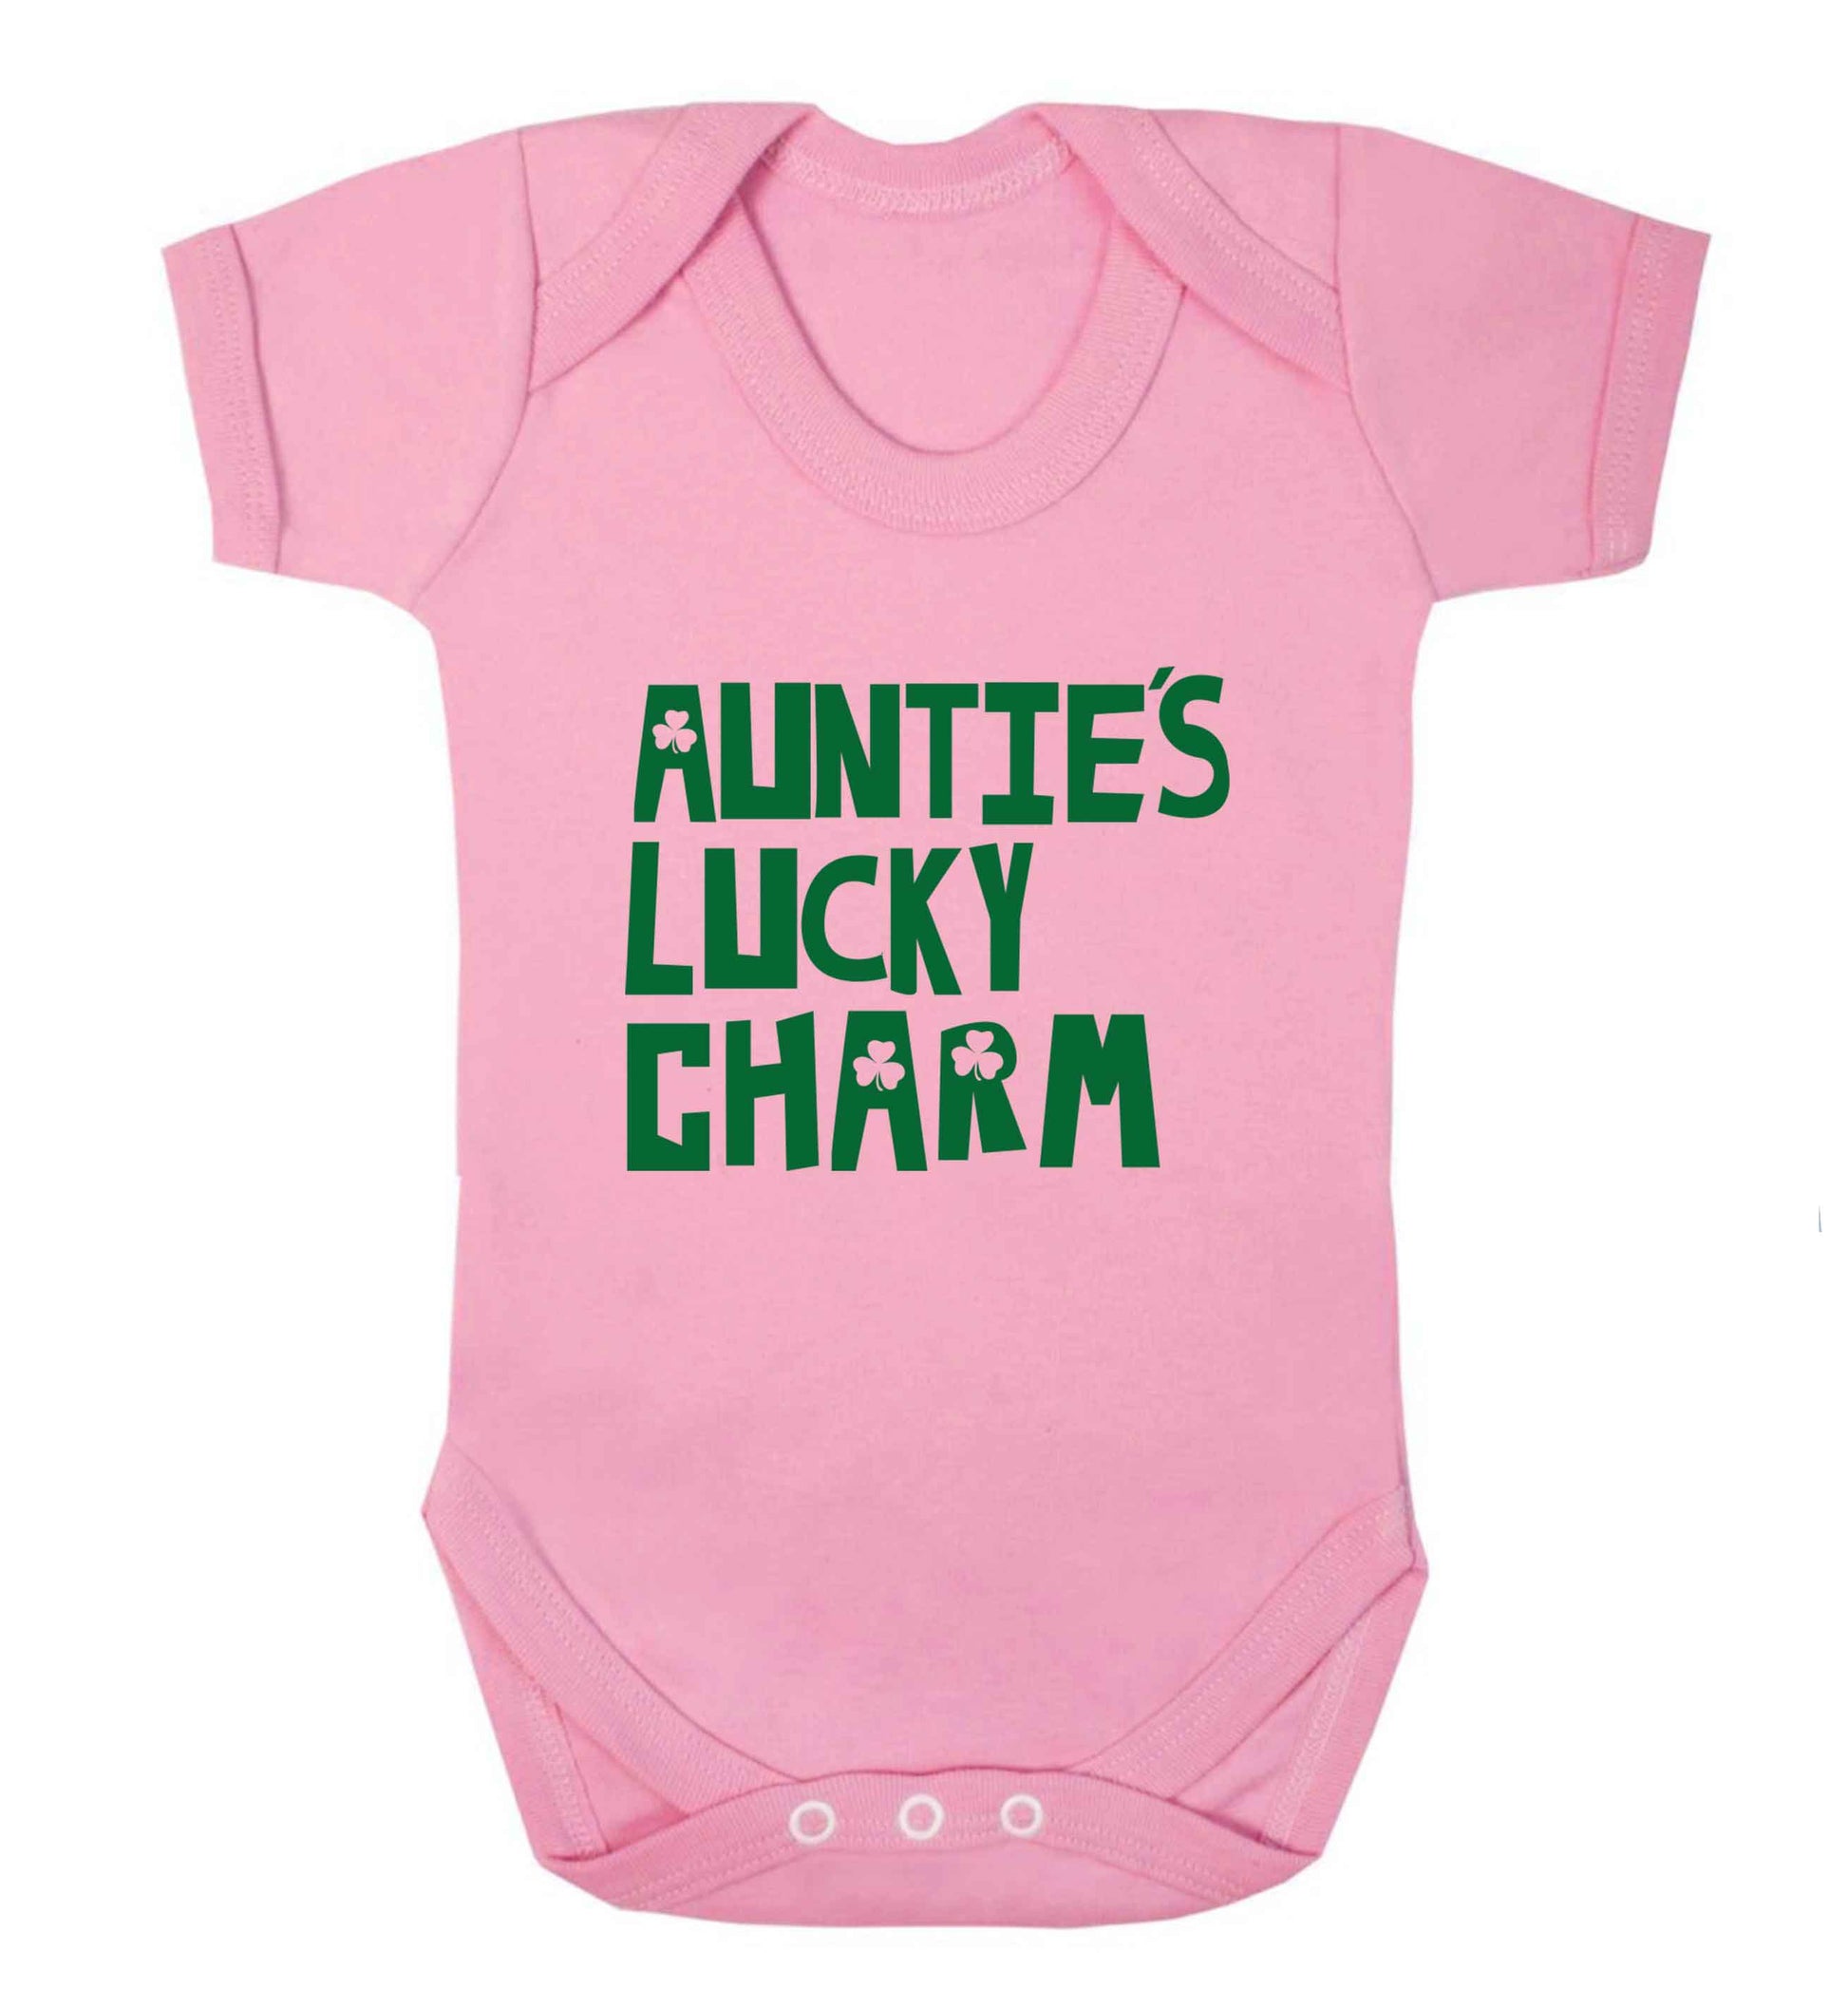 Auntie's lucky charm baby vest pale pink 18-24 months